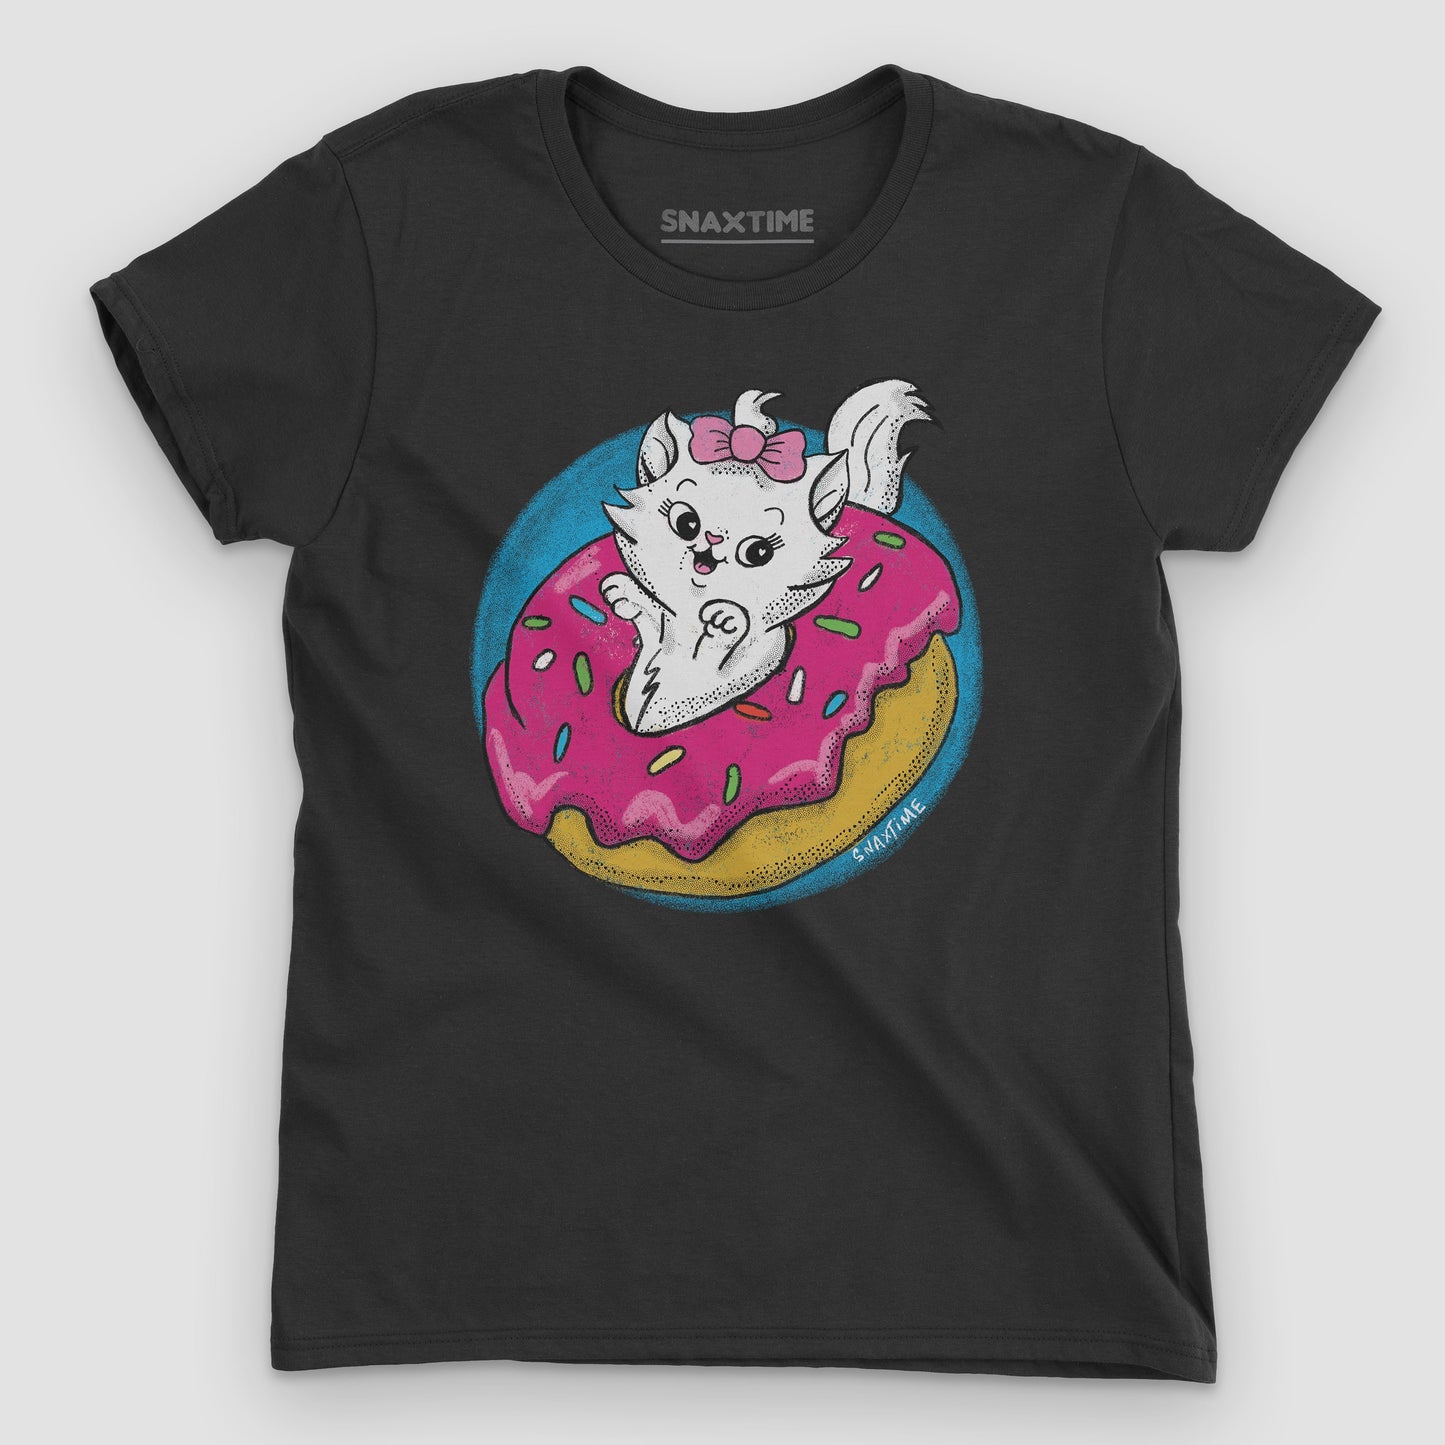 Black Donut Kitty Women's Graphic T-Shirt by Snaxtime